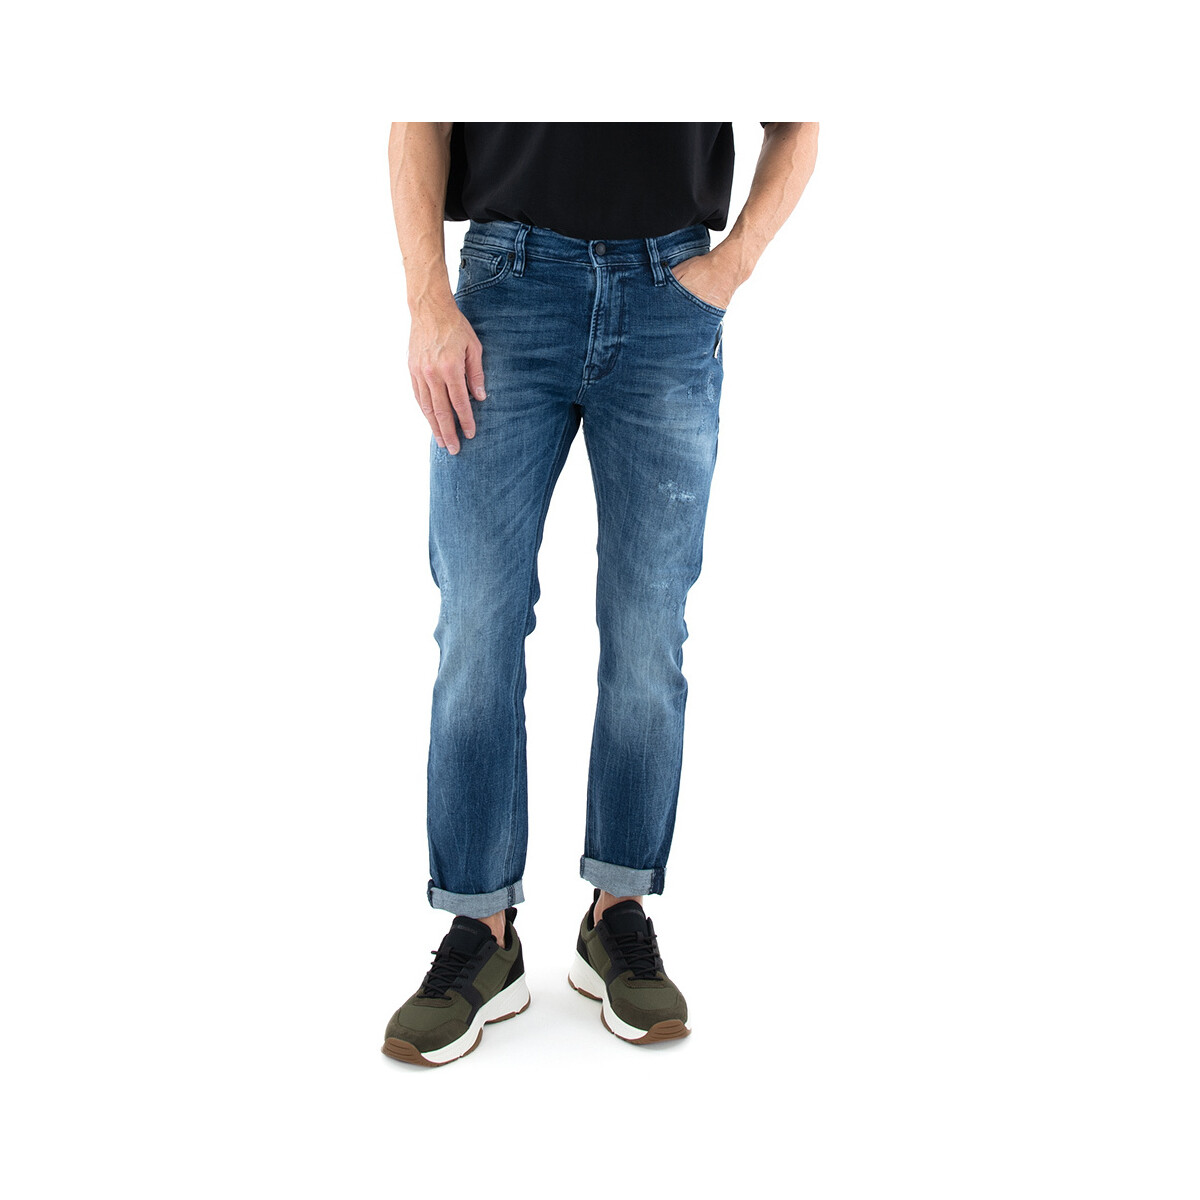 Jeans Staff Jeans SAPPHIRE SLIM FIT TAPERED JEANS MEN 26480488H